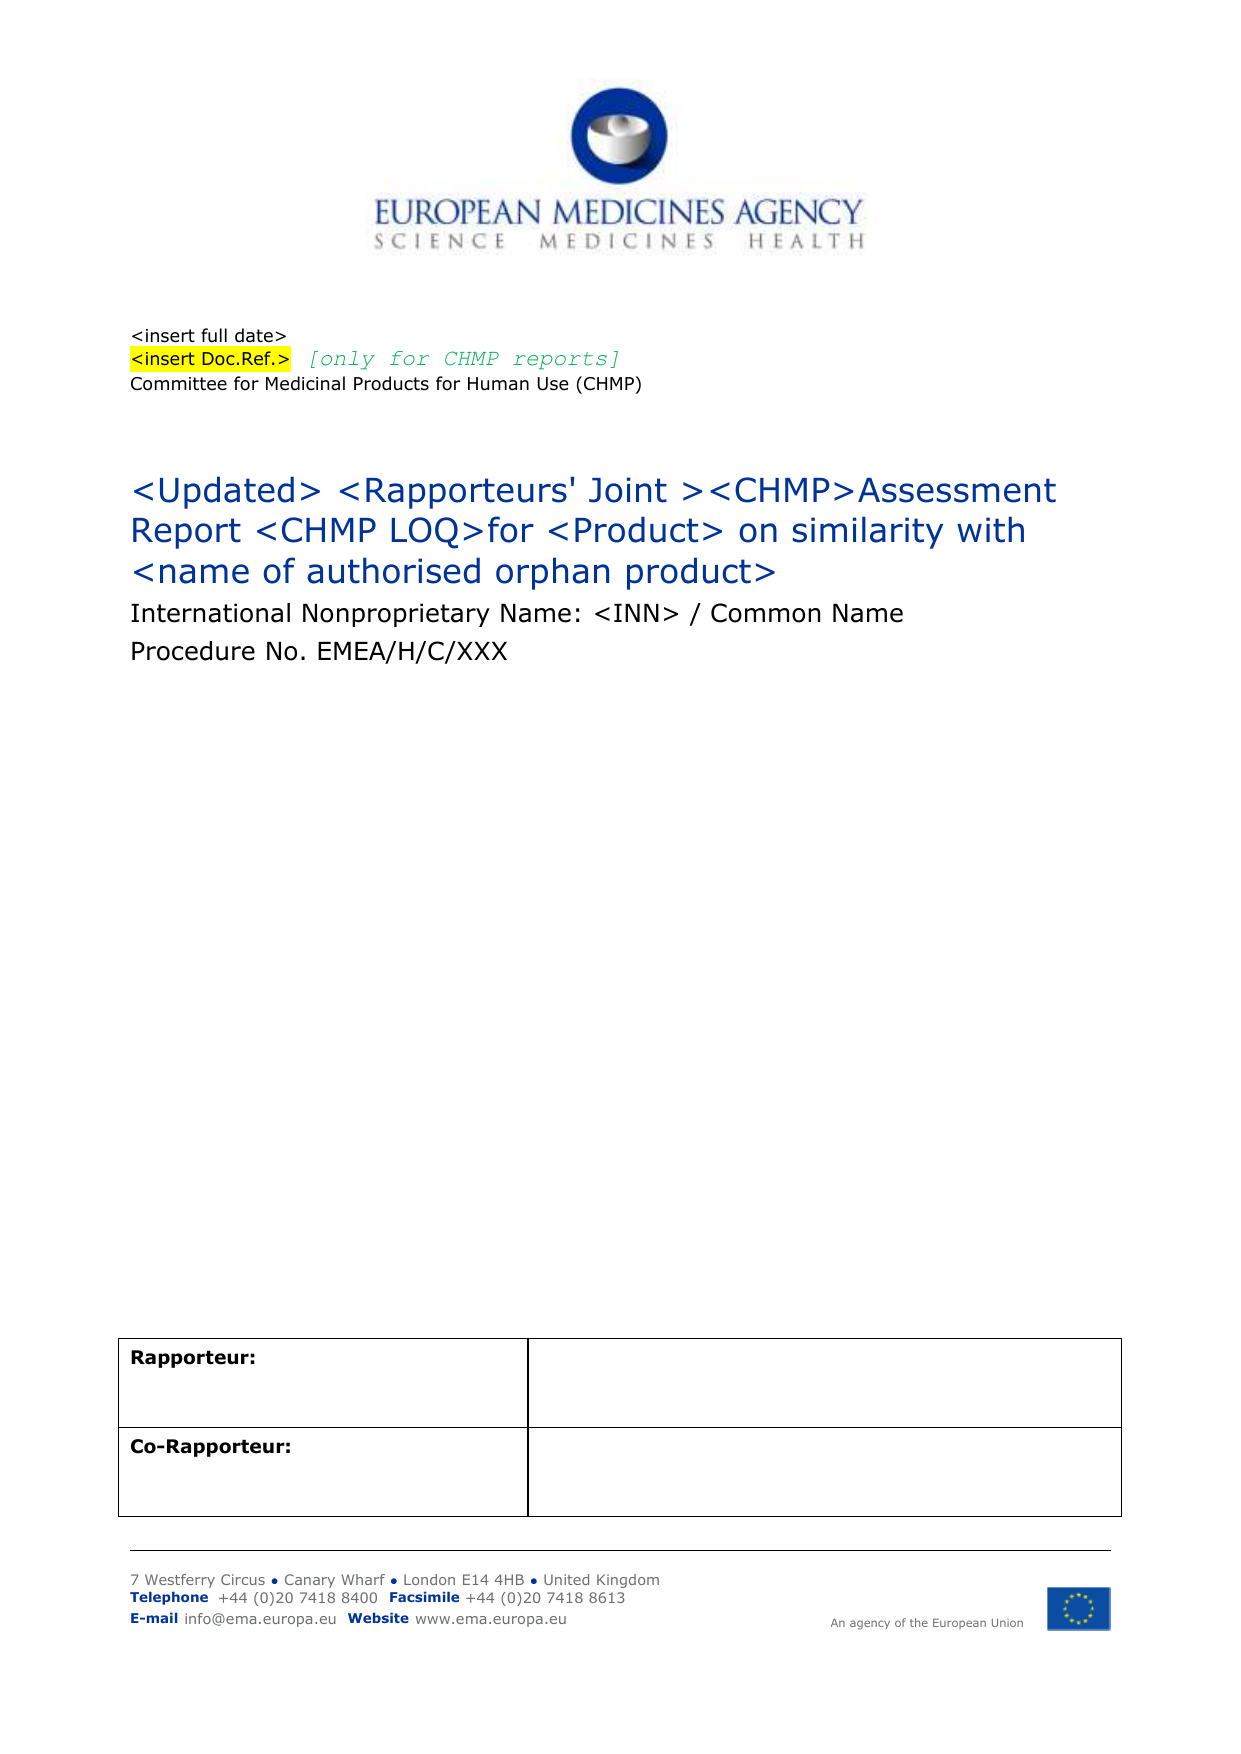 CHMP and Rapporteurs JAR template on assessment of similarity Within Rapporteur Report Template